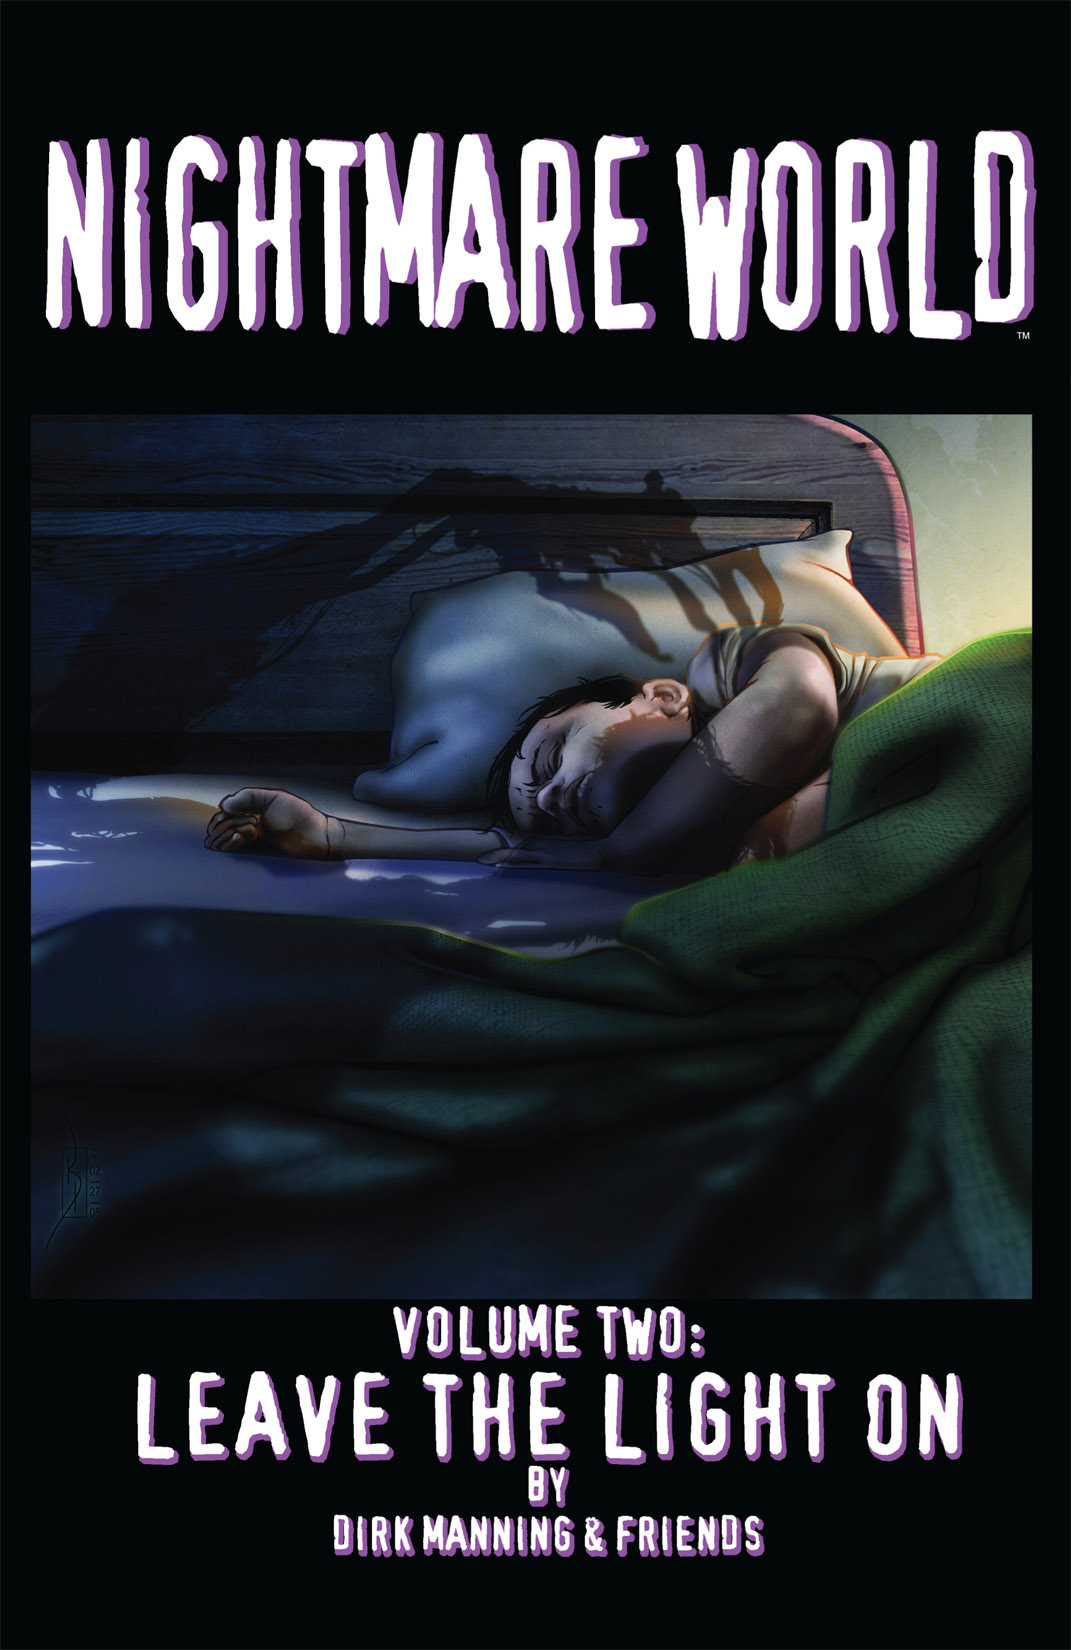 Read online Nightmare World comic -  Issue # Vol. 2 Leave the Light On - 1